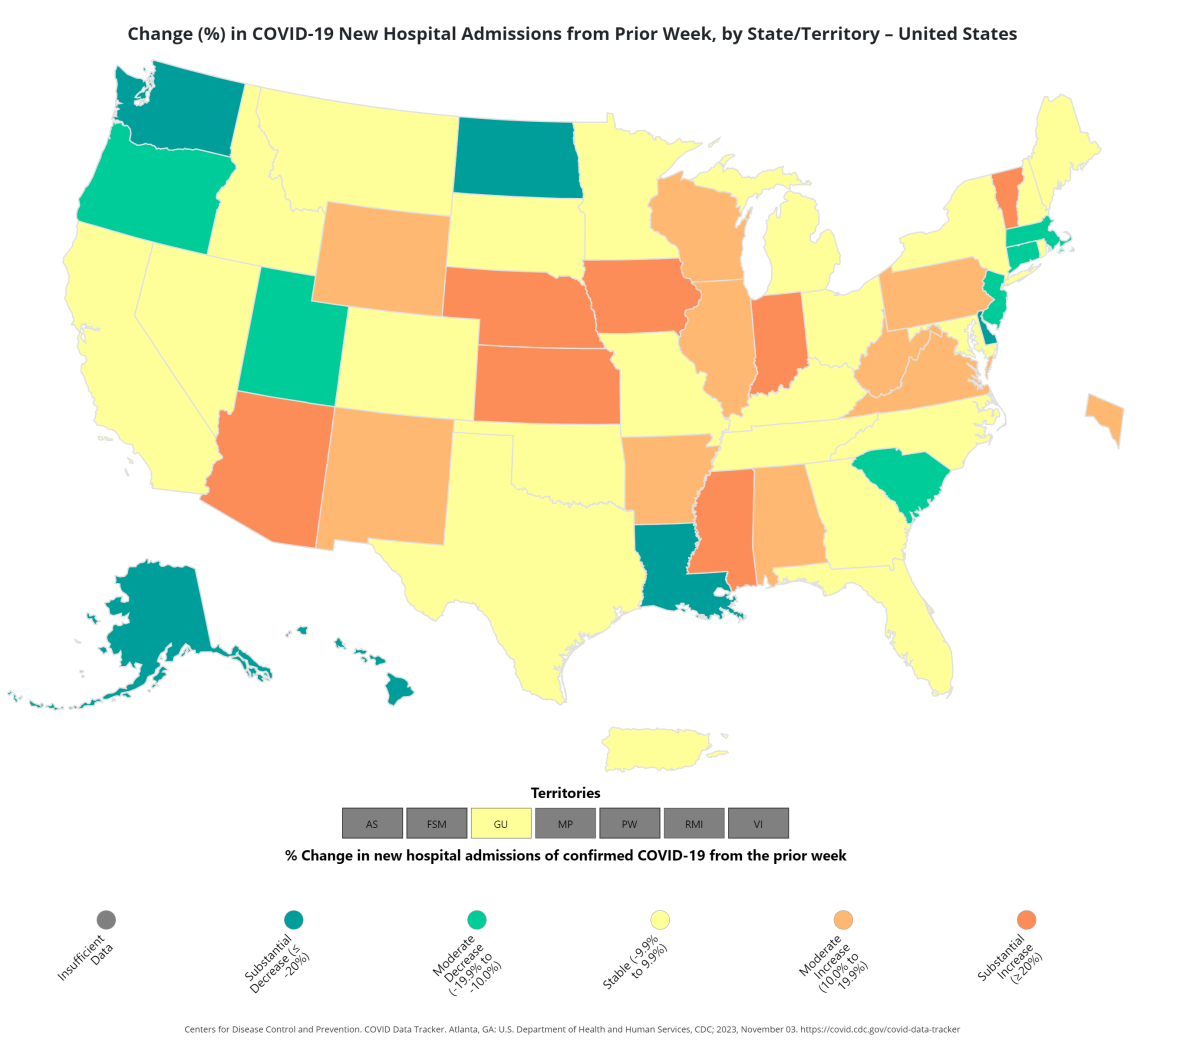 Increase in COVID hospitalizations by state